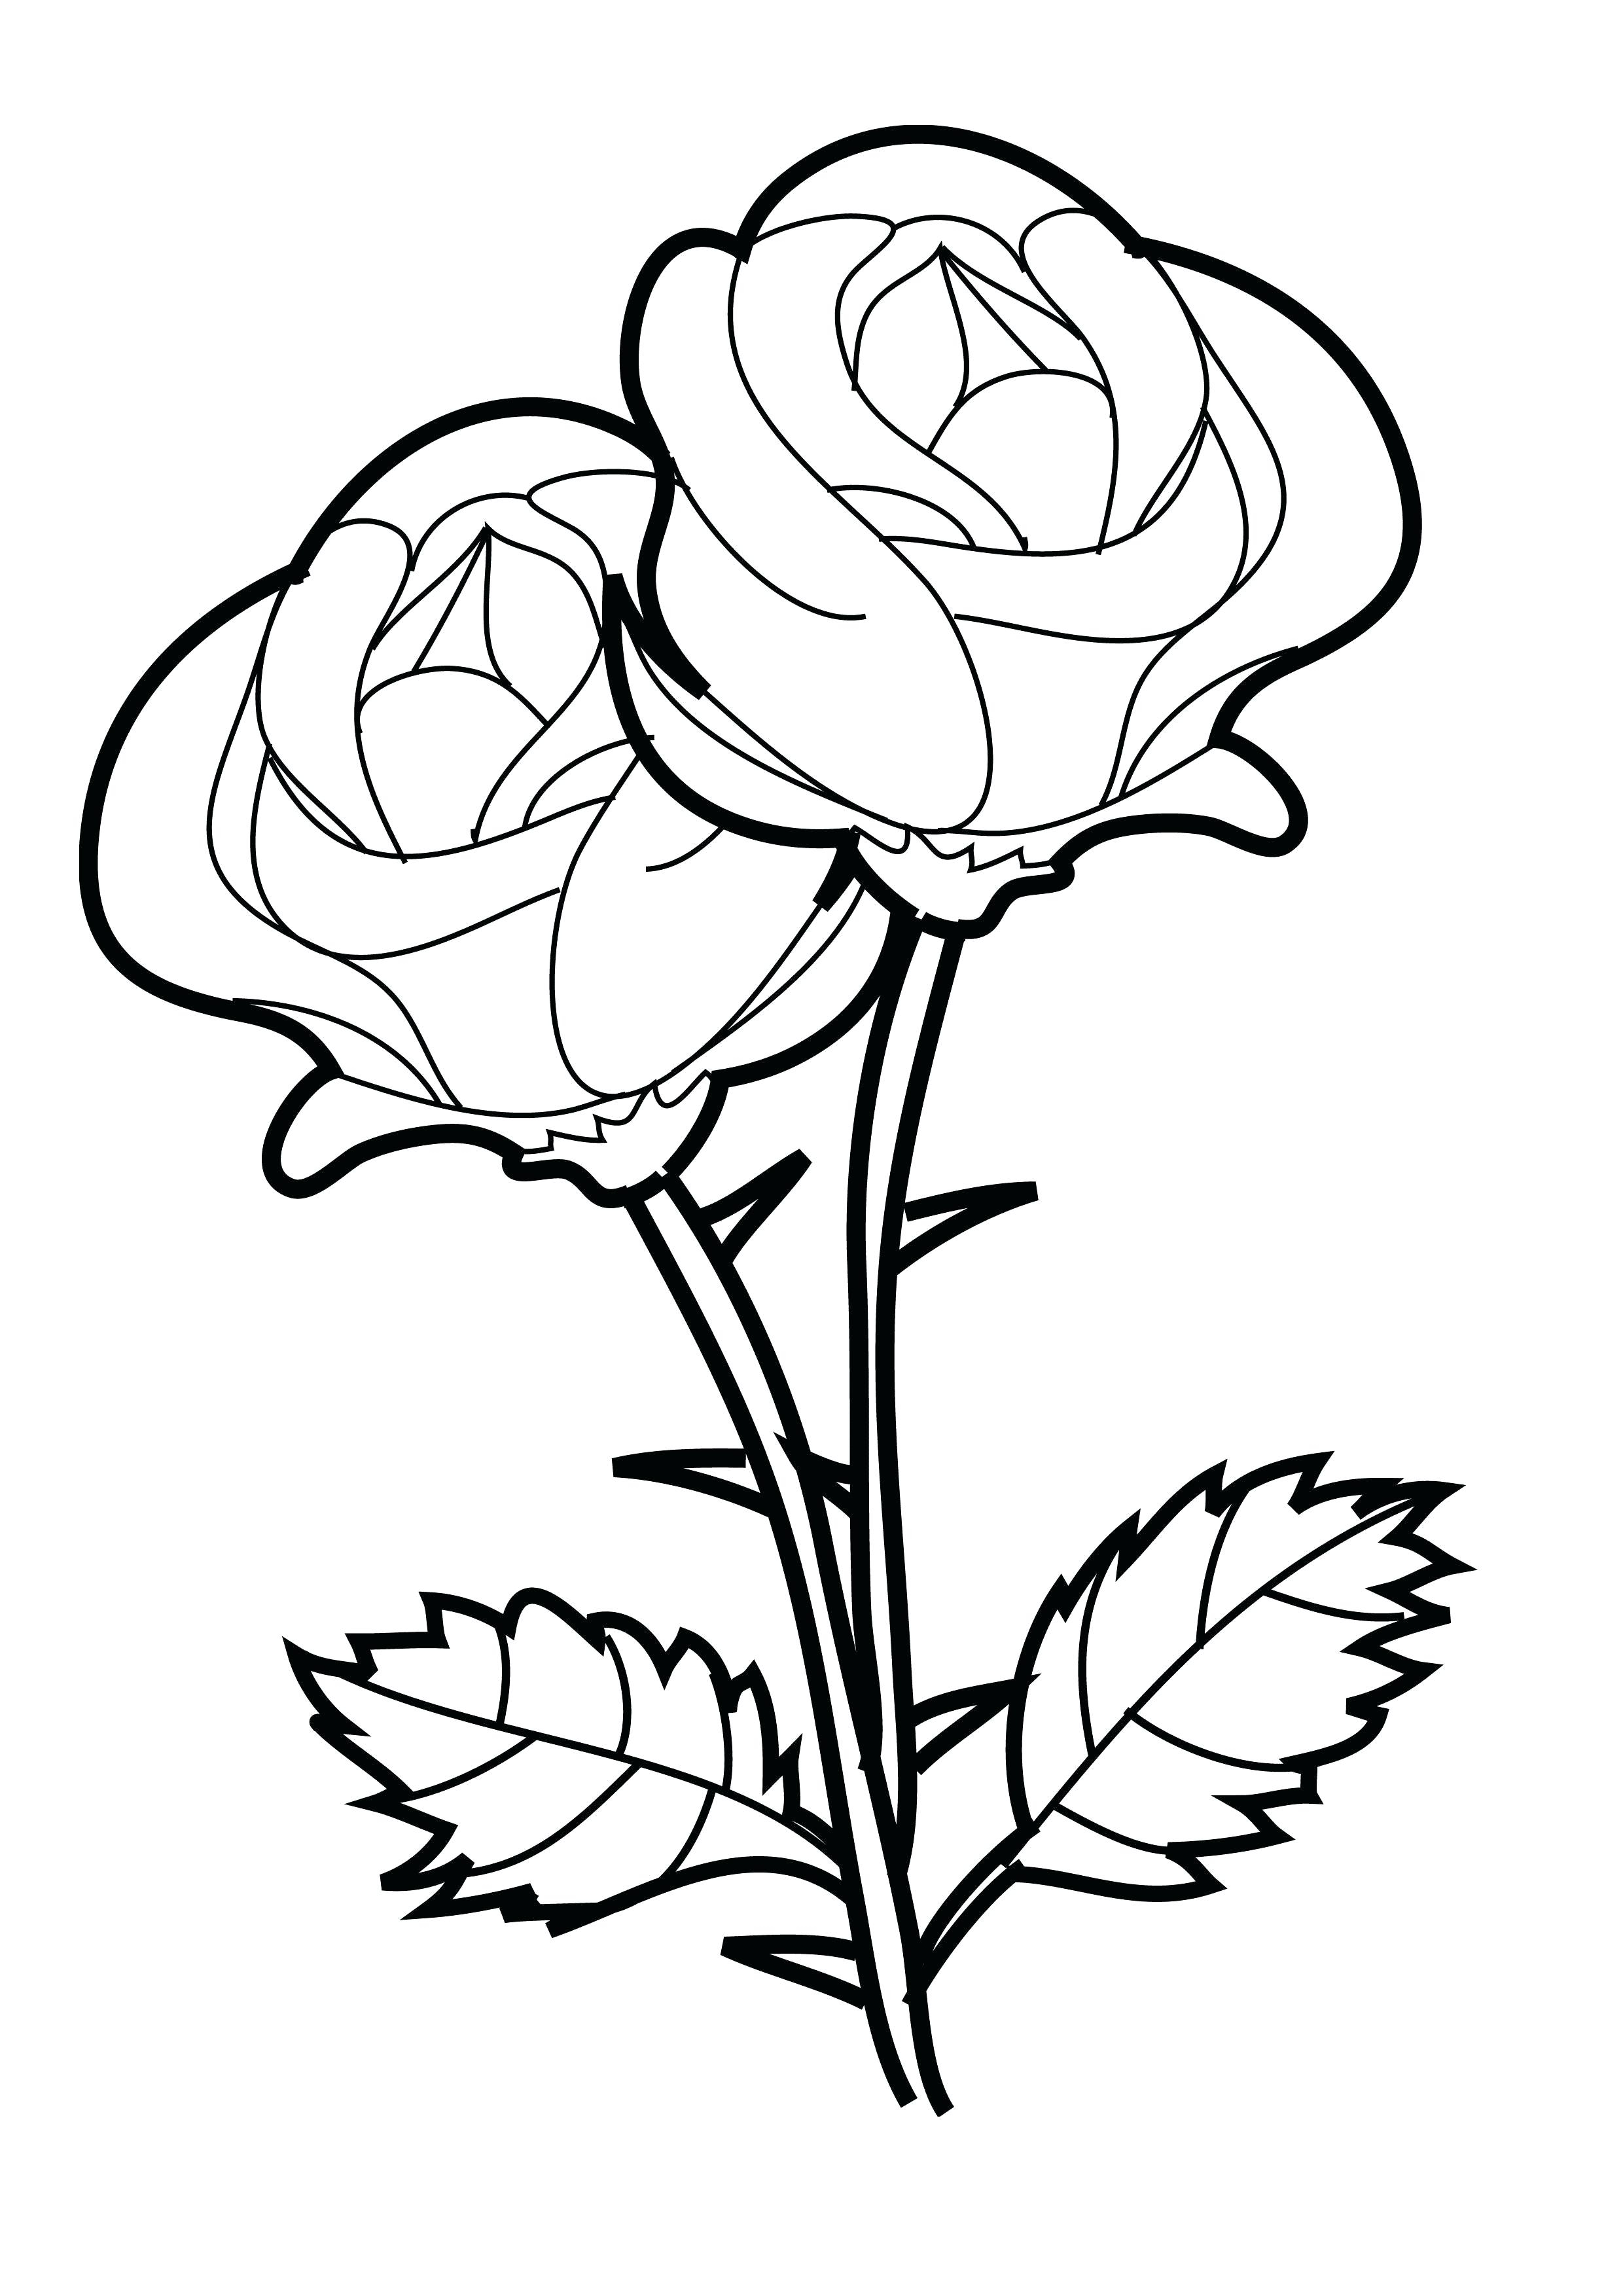 Coloring Pages Of Crosses With Flowers Coloring Picture Of A Flower Shoppageco